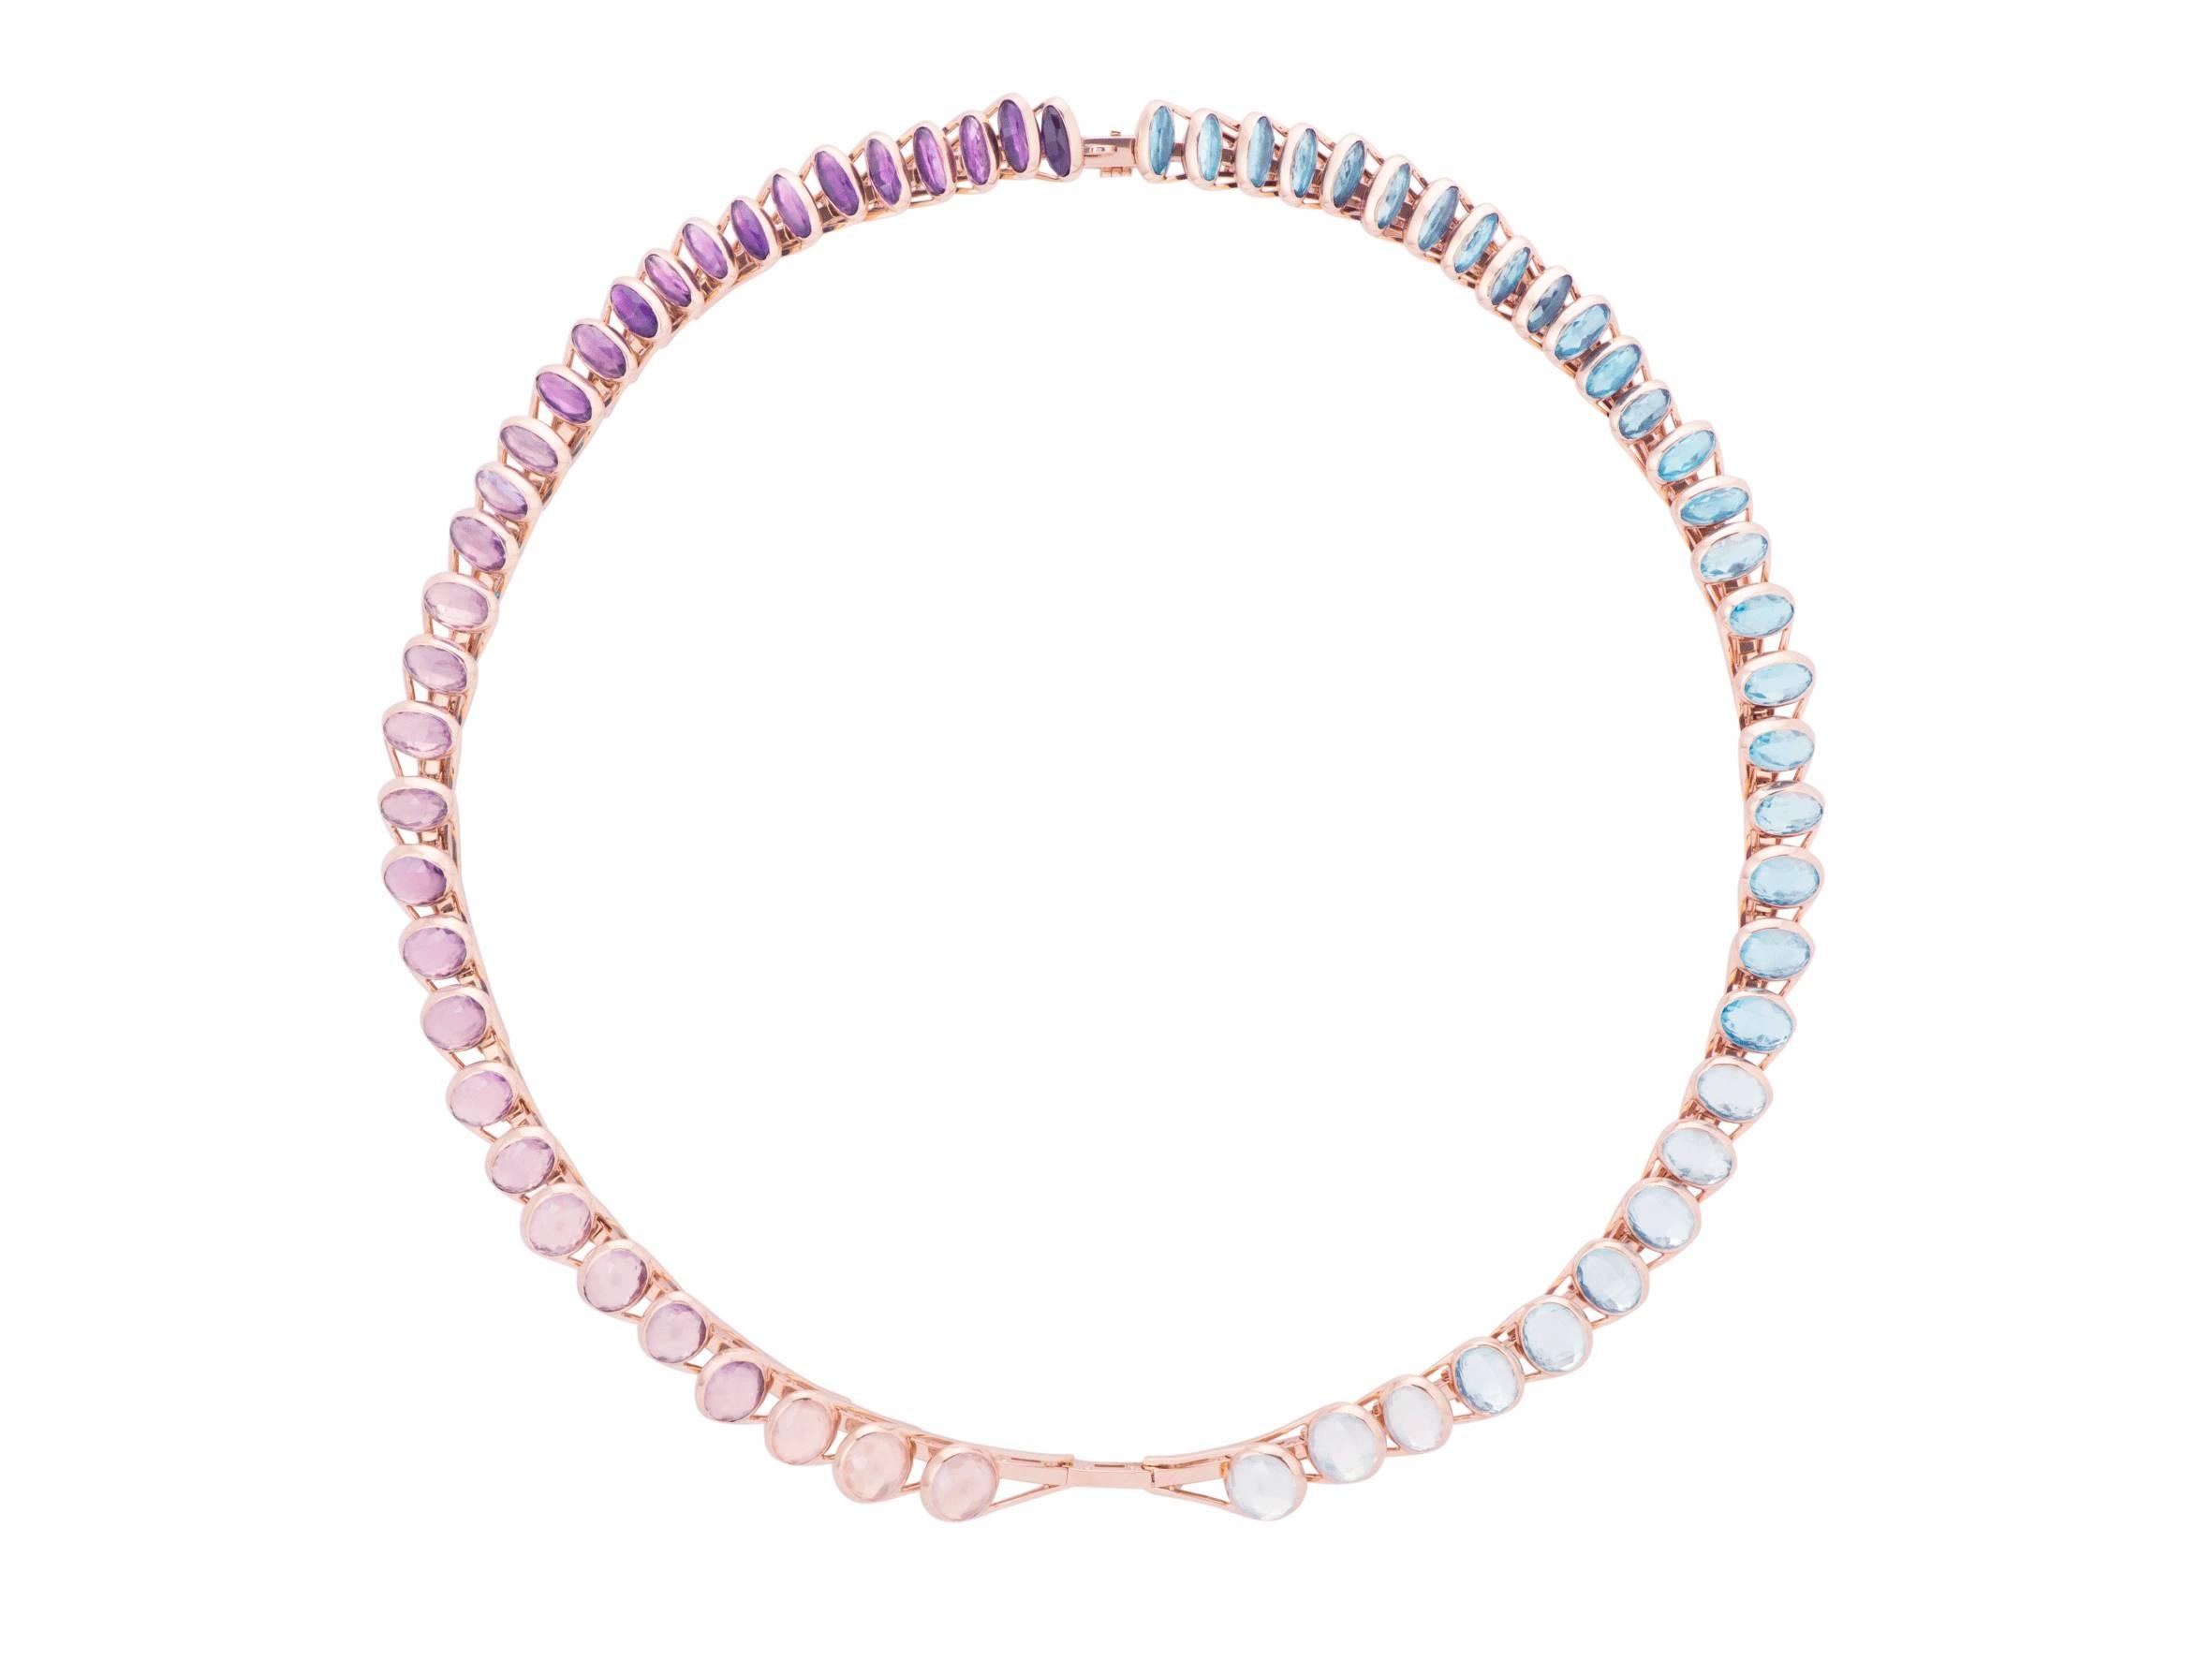 This transformable Necklace, in 18 Carat Pink Gold is set with shades of Amethysts, quartz, and Topaz. All the stones are set by two, back to back. On one side there is a shade of purple and on the other side there is a shade of blue. All the stones